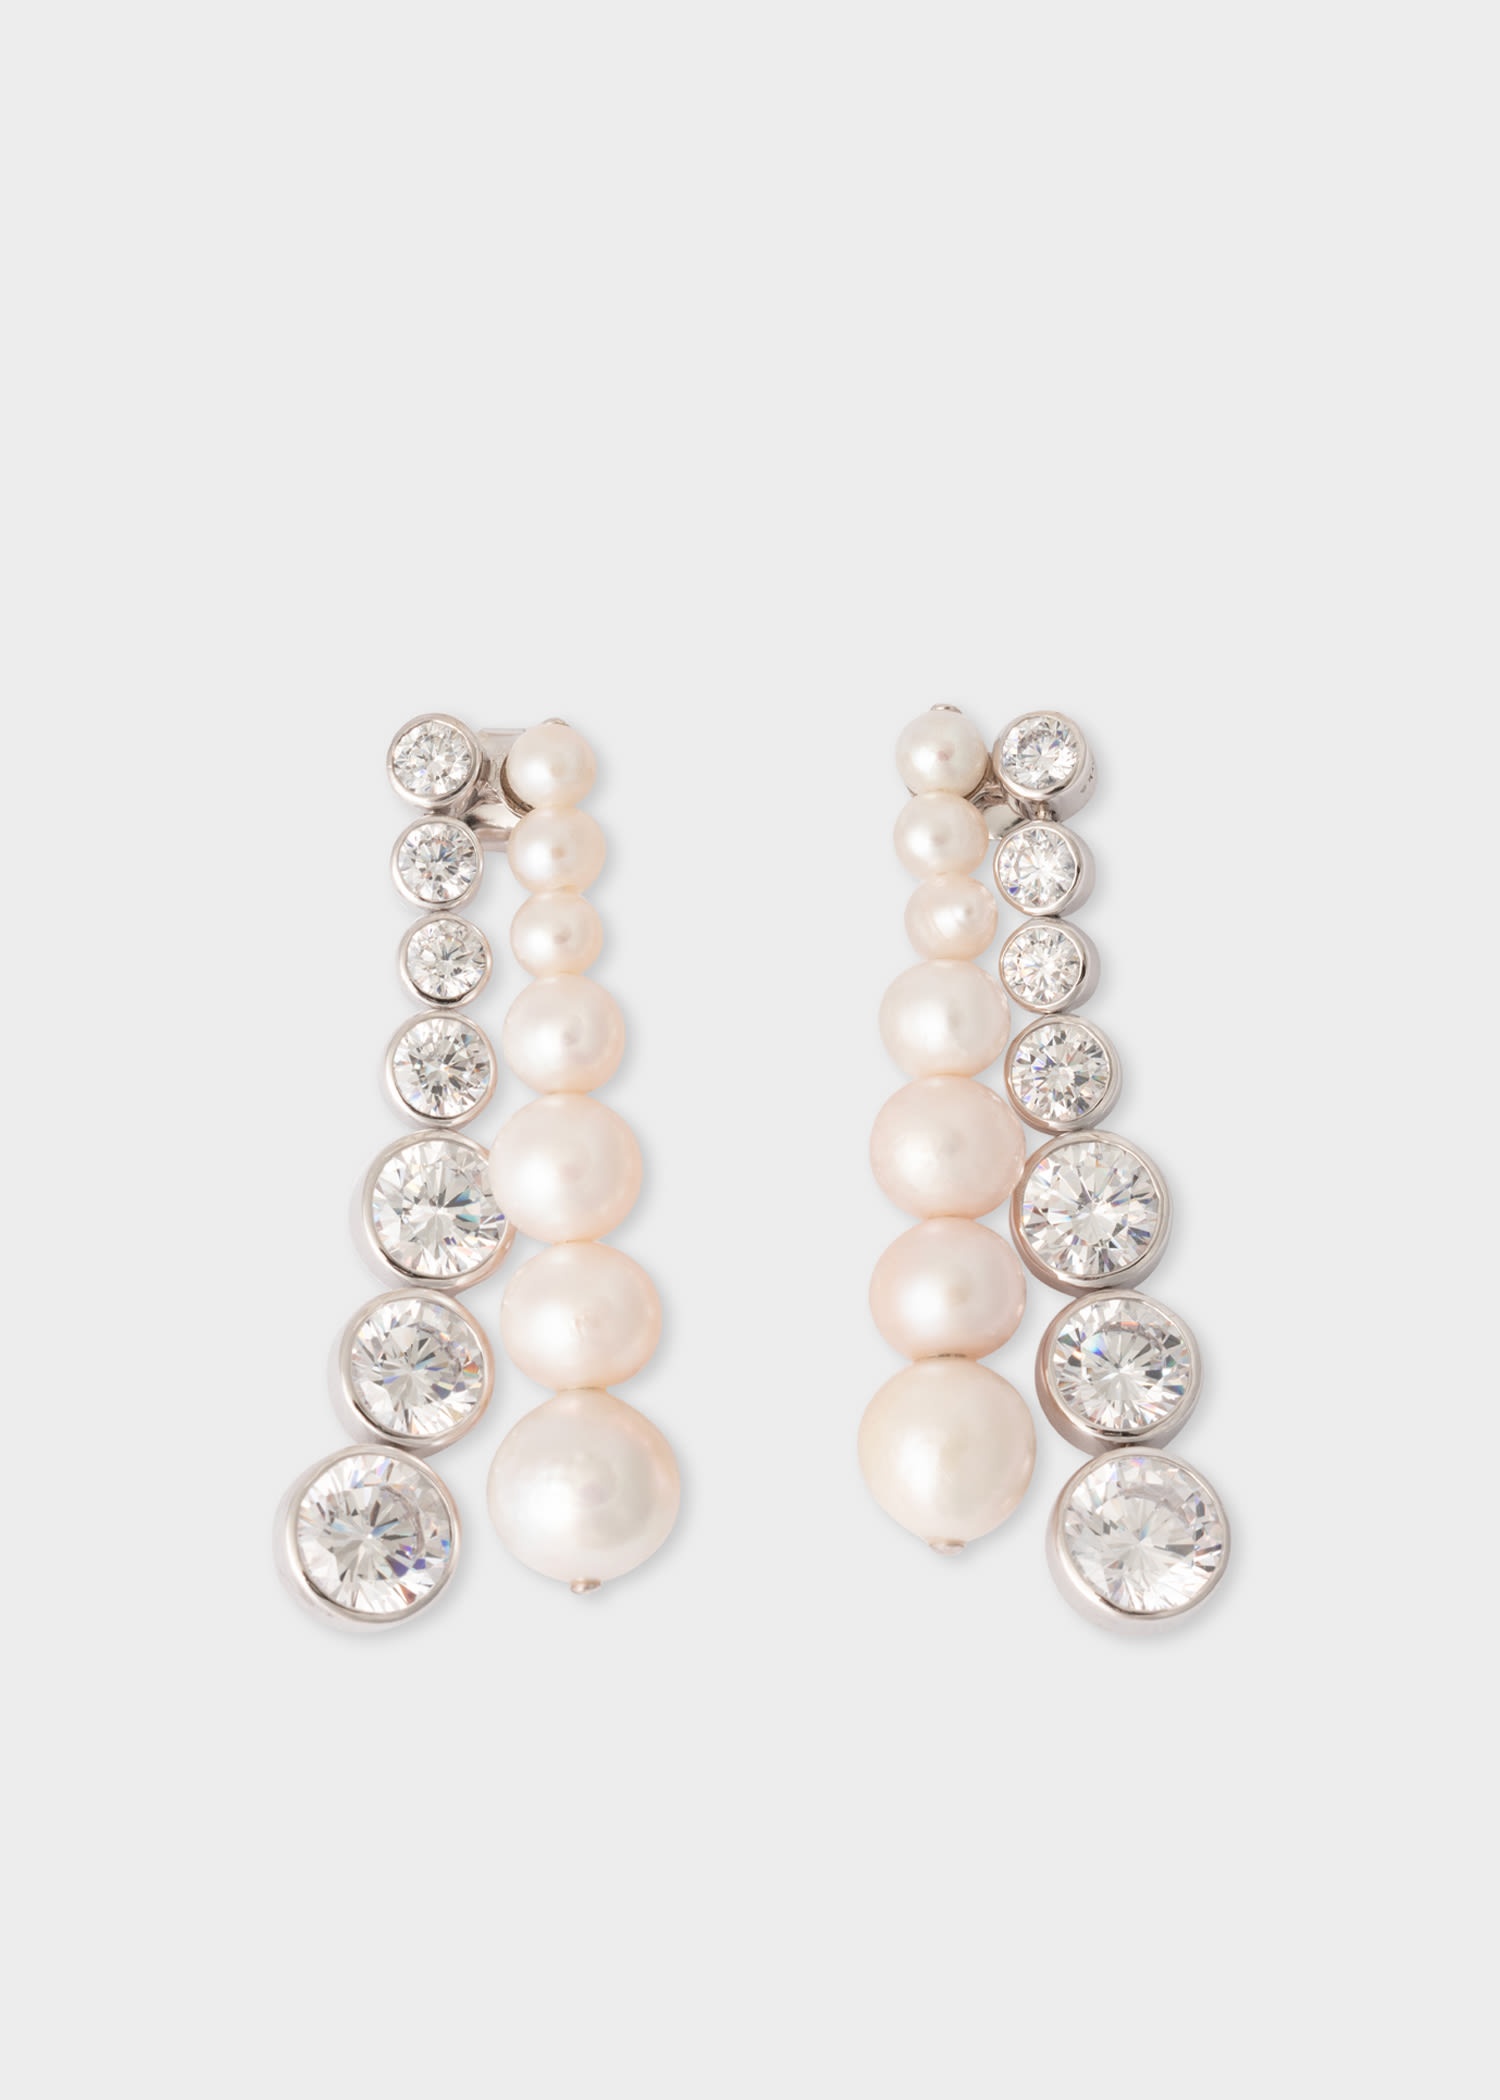 Pearl & Cubic Zirconia Platinum Earrings by Completedworks - 1